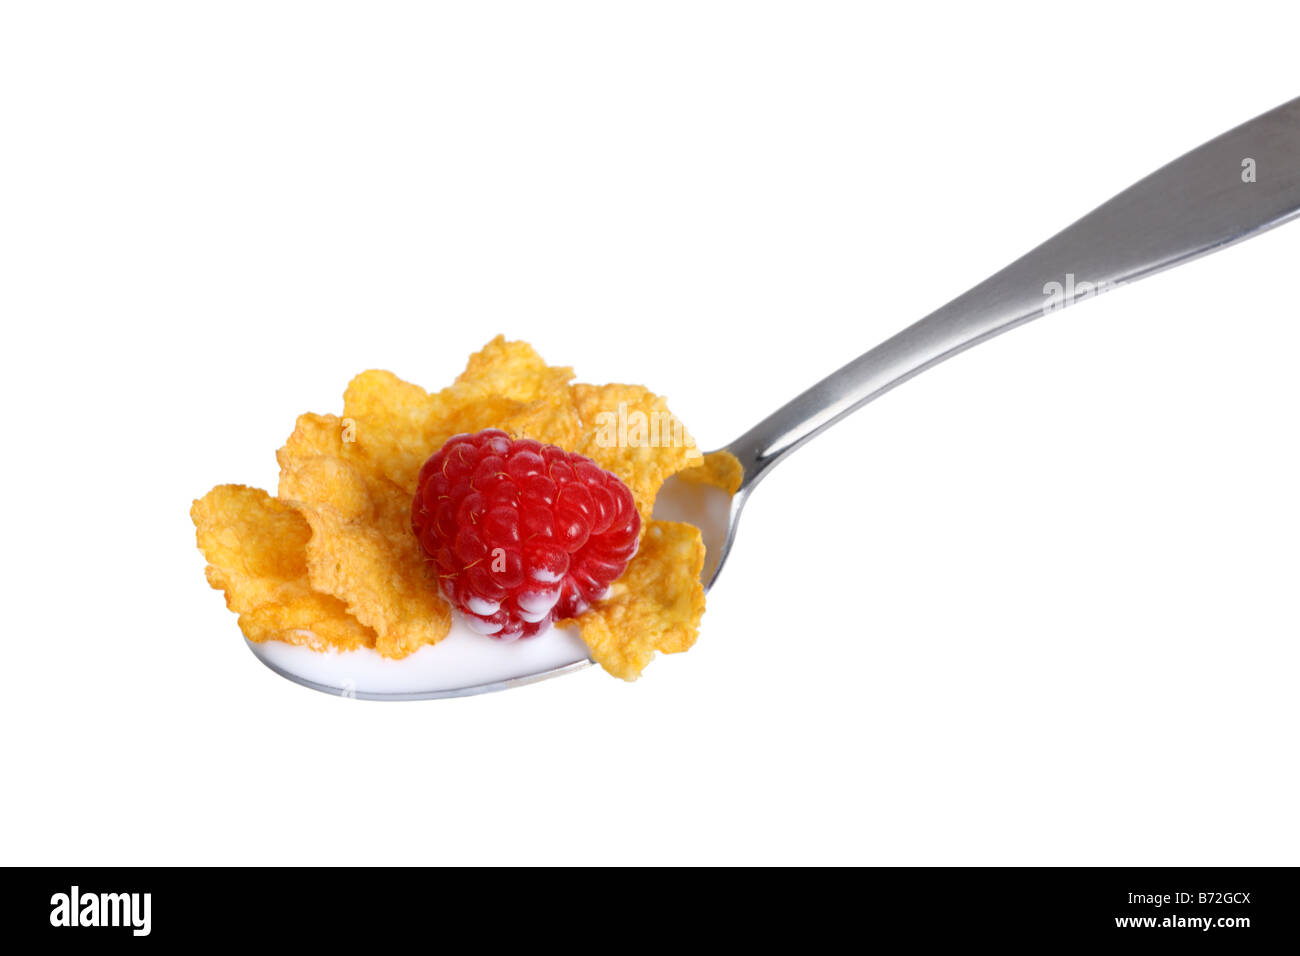 Spoon of cereal milk and raspberry cut out on white background Stock Photo